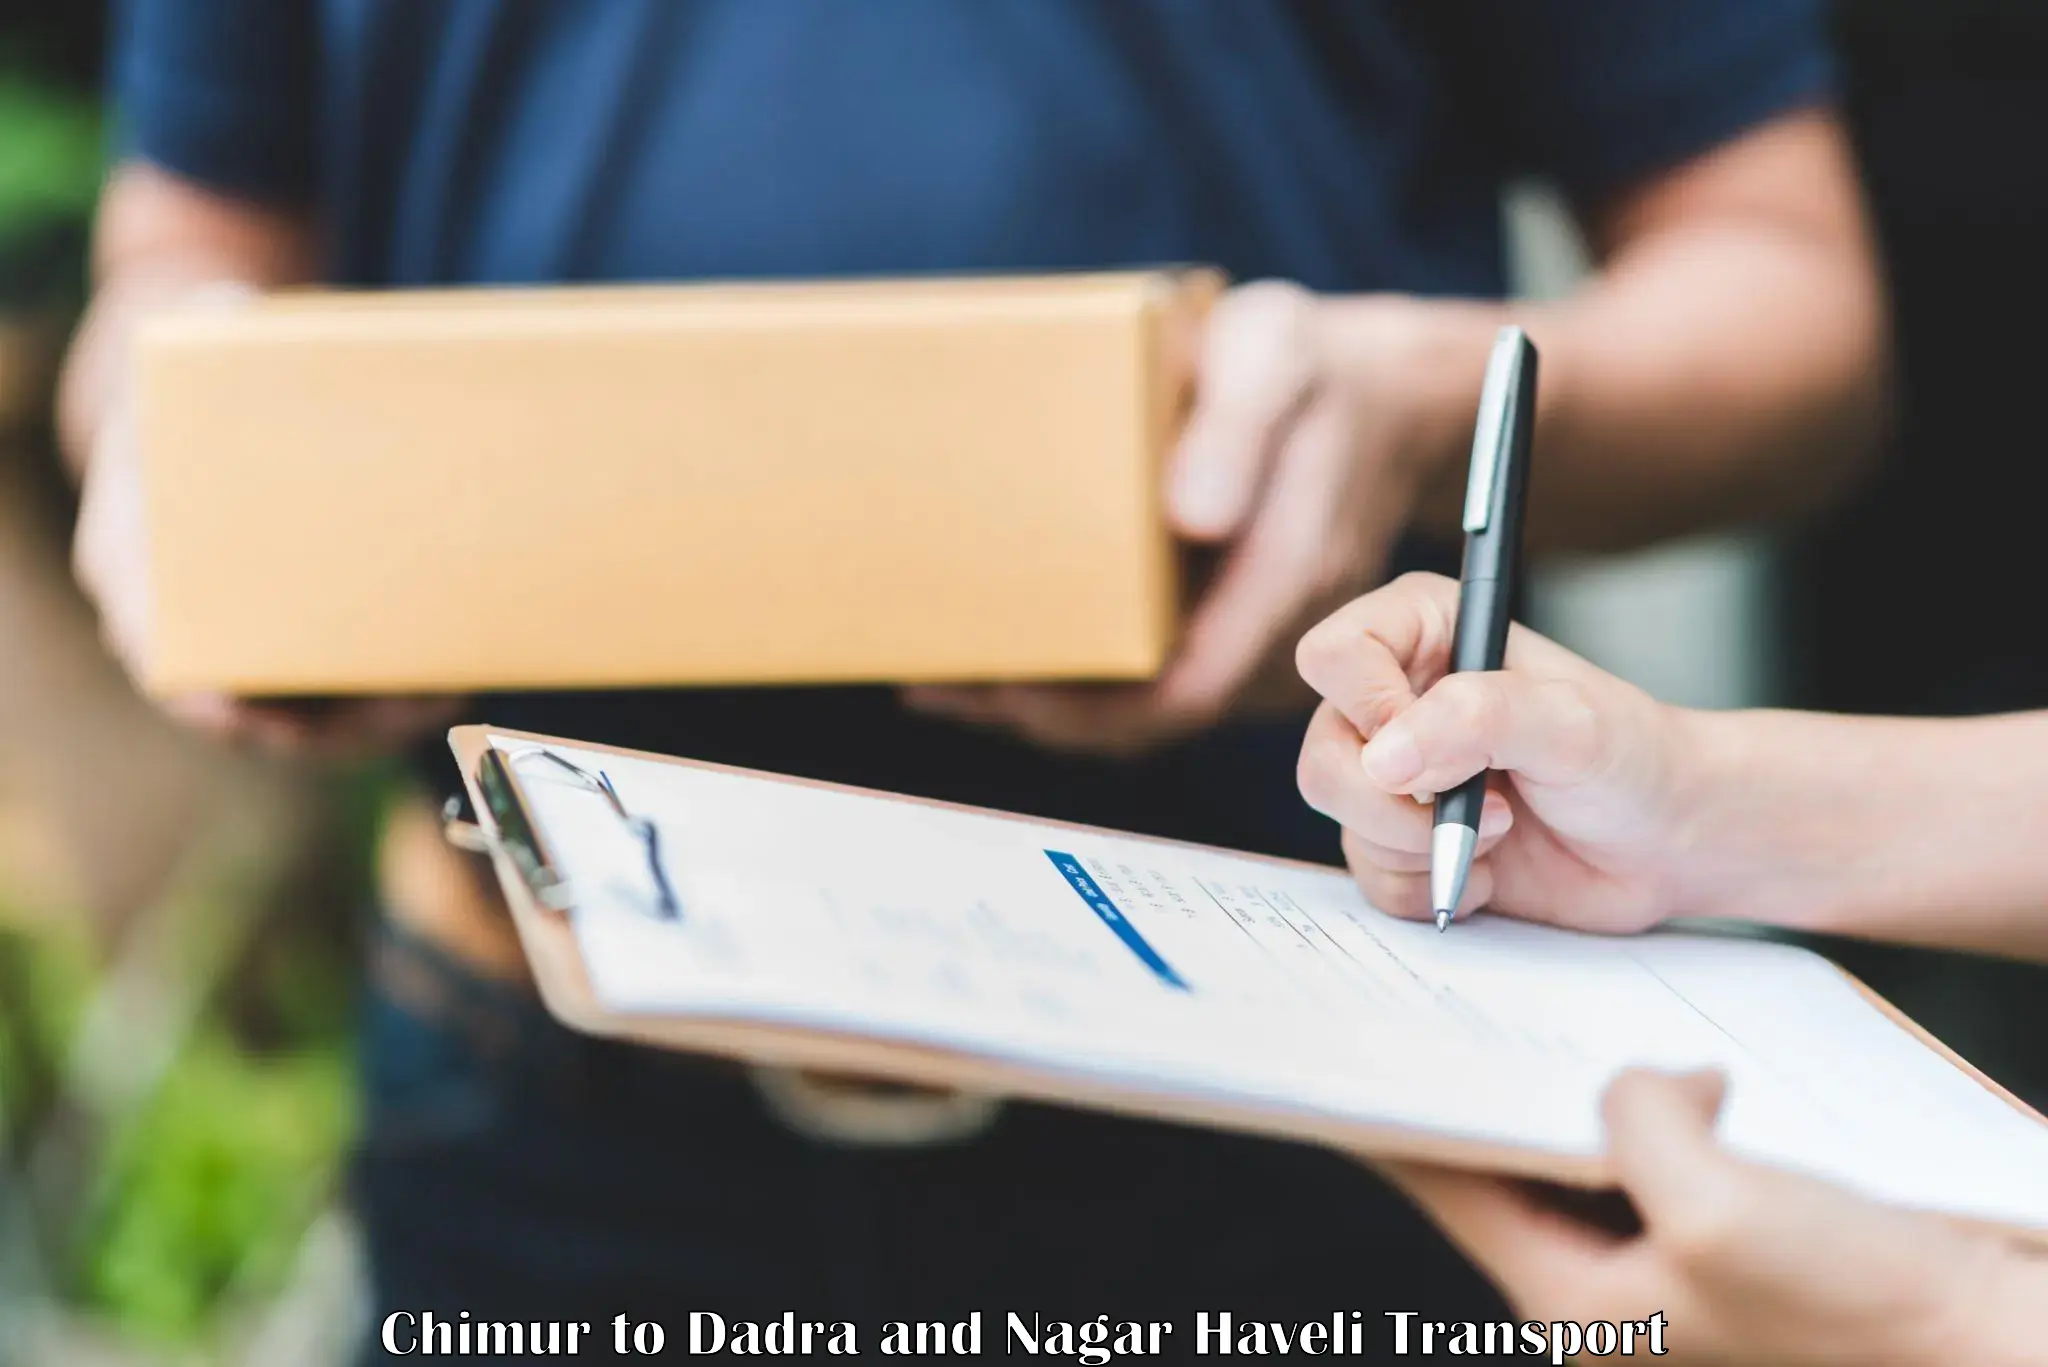 Truck transport companies in India Chimur to Dadra and Nagar Haveli